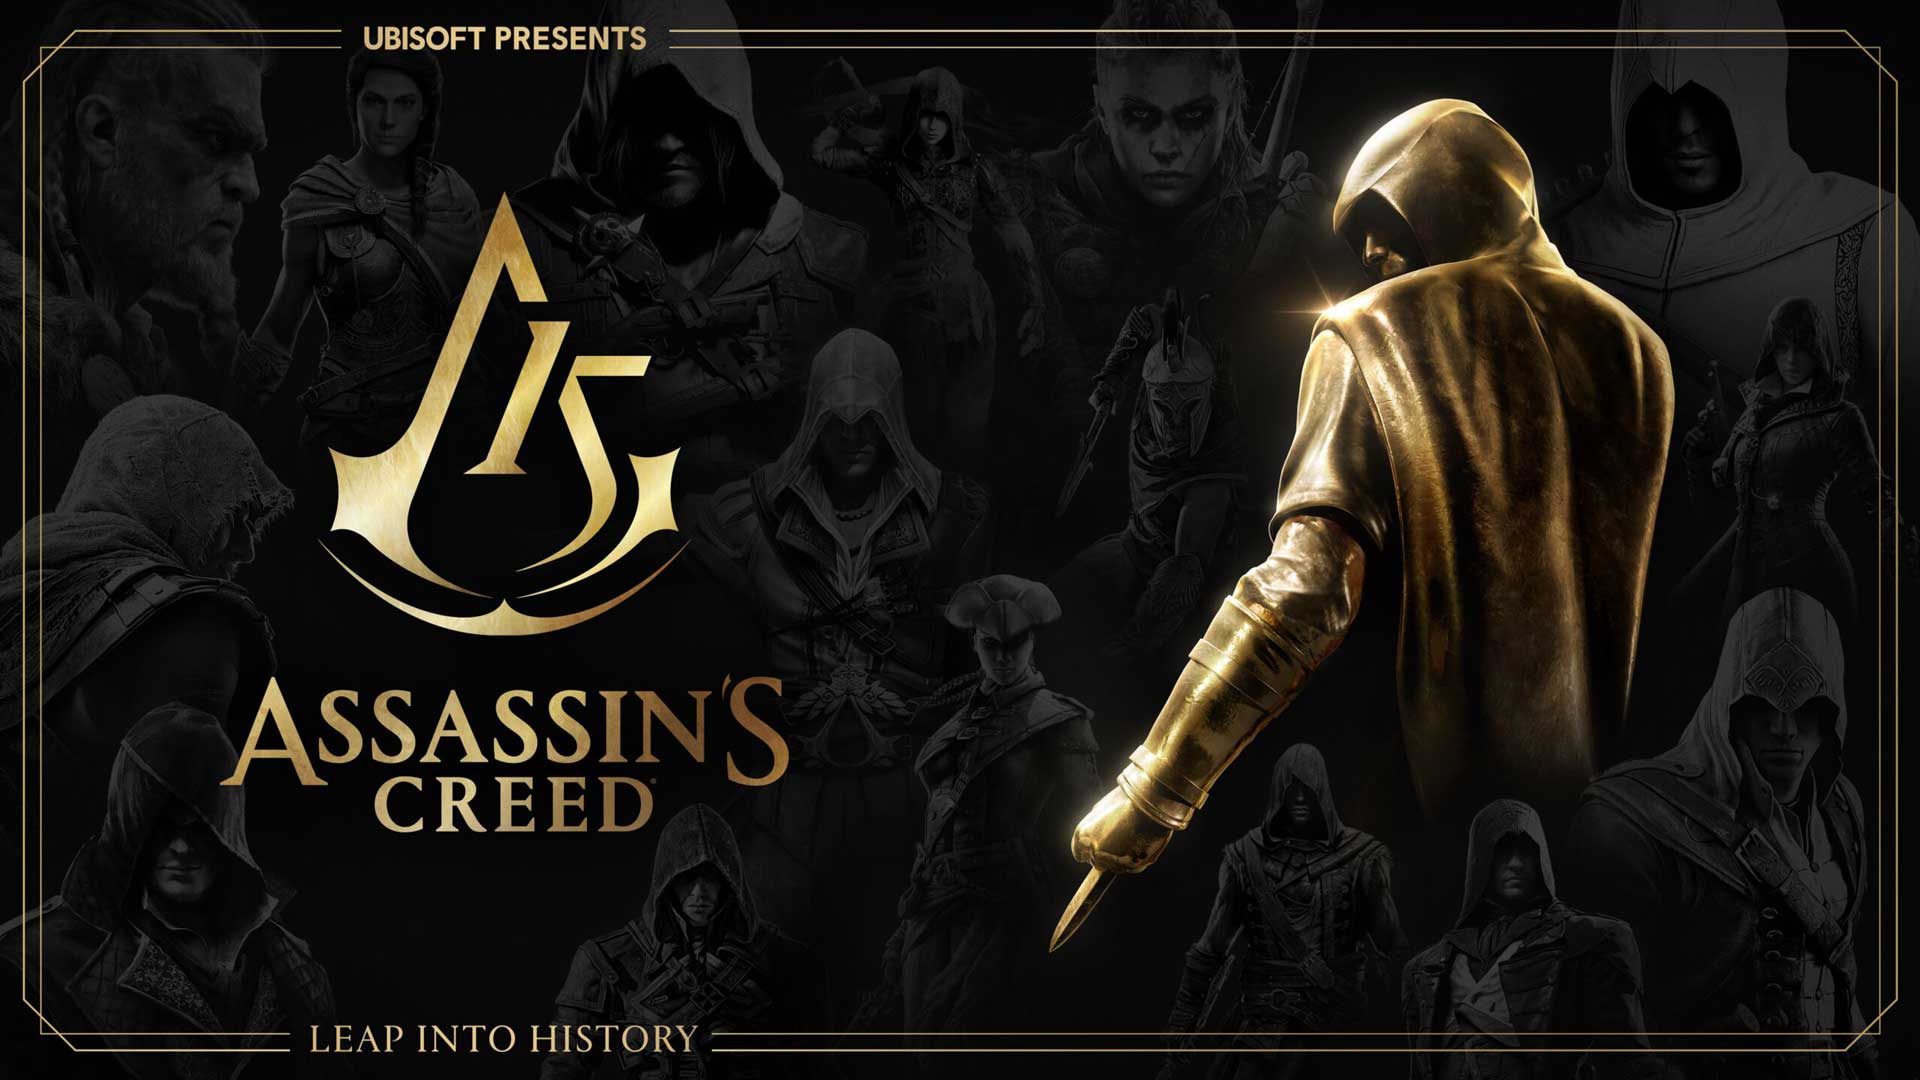 ubisoft presents assassins creed leap into history  Image of ubisoft presents assassins creed leap into history